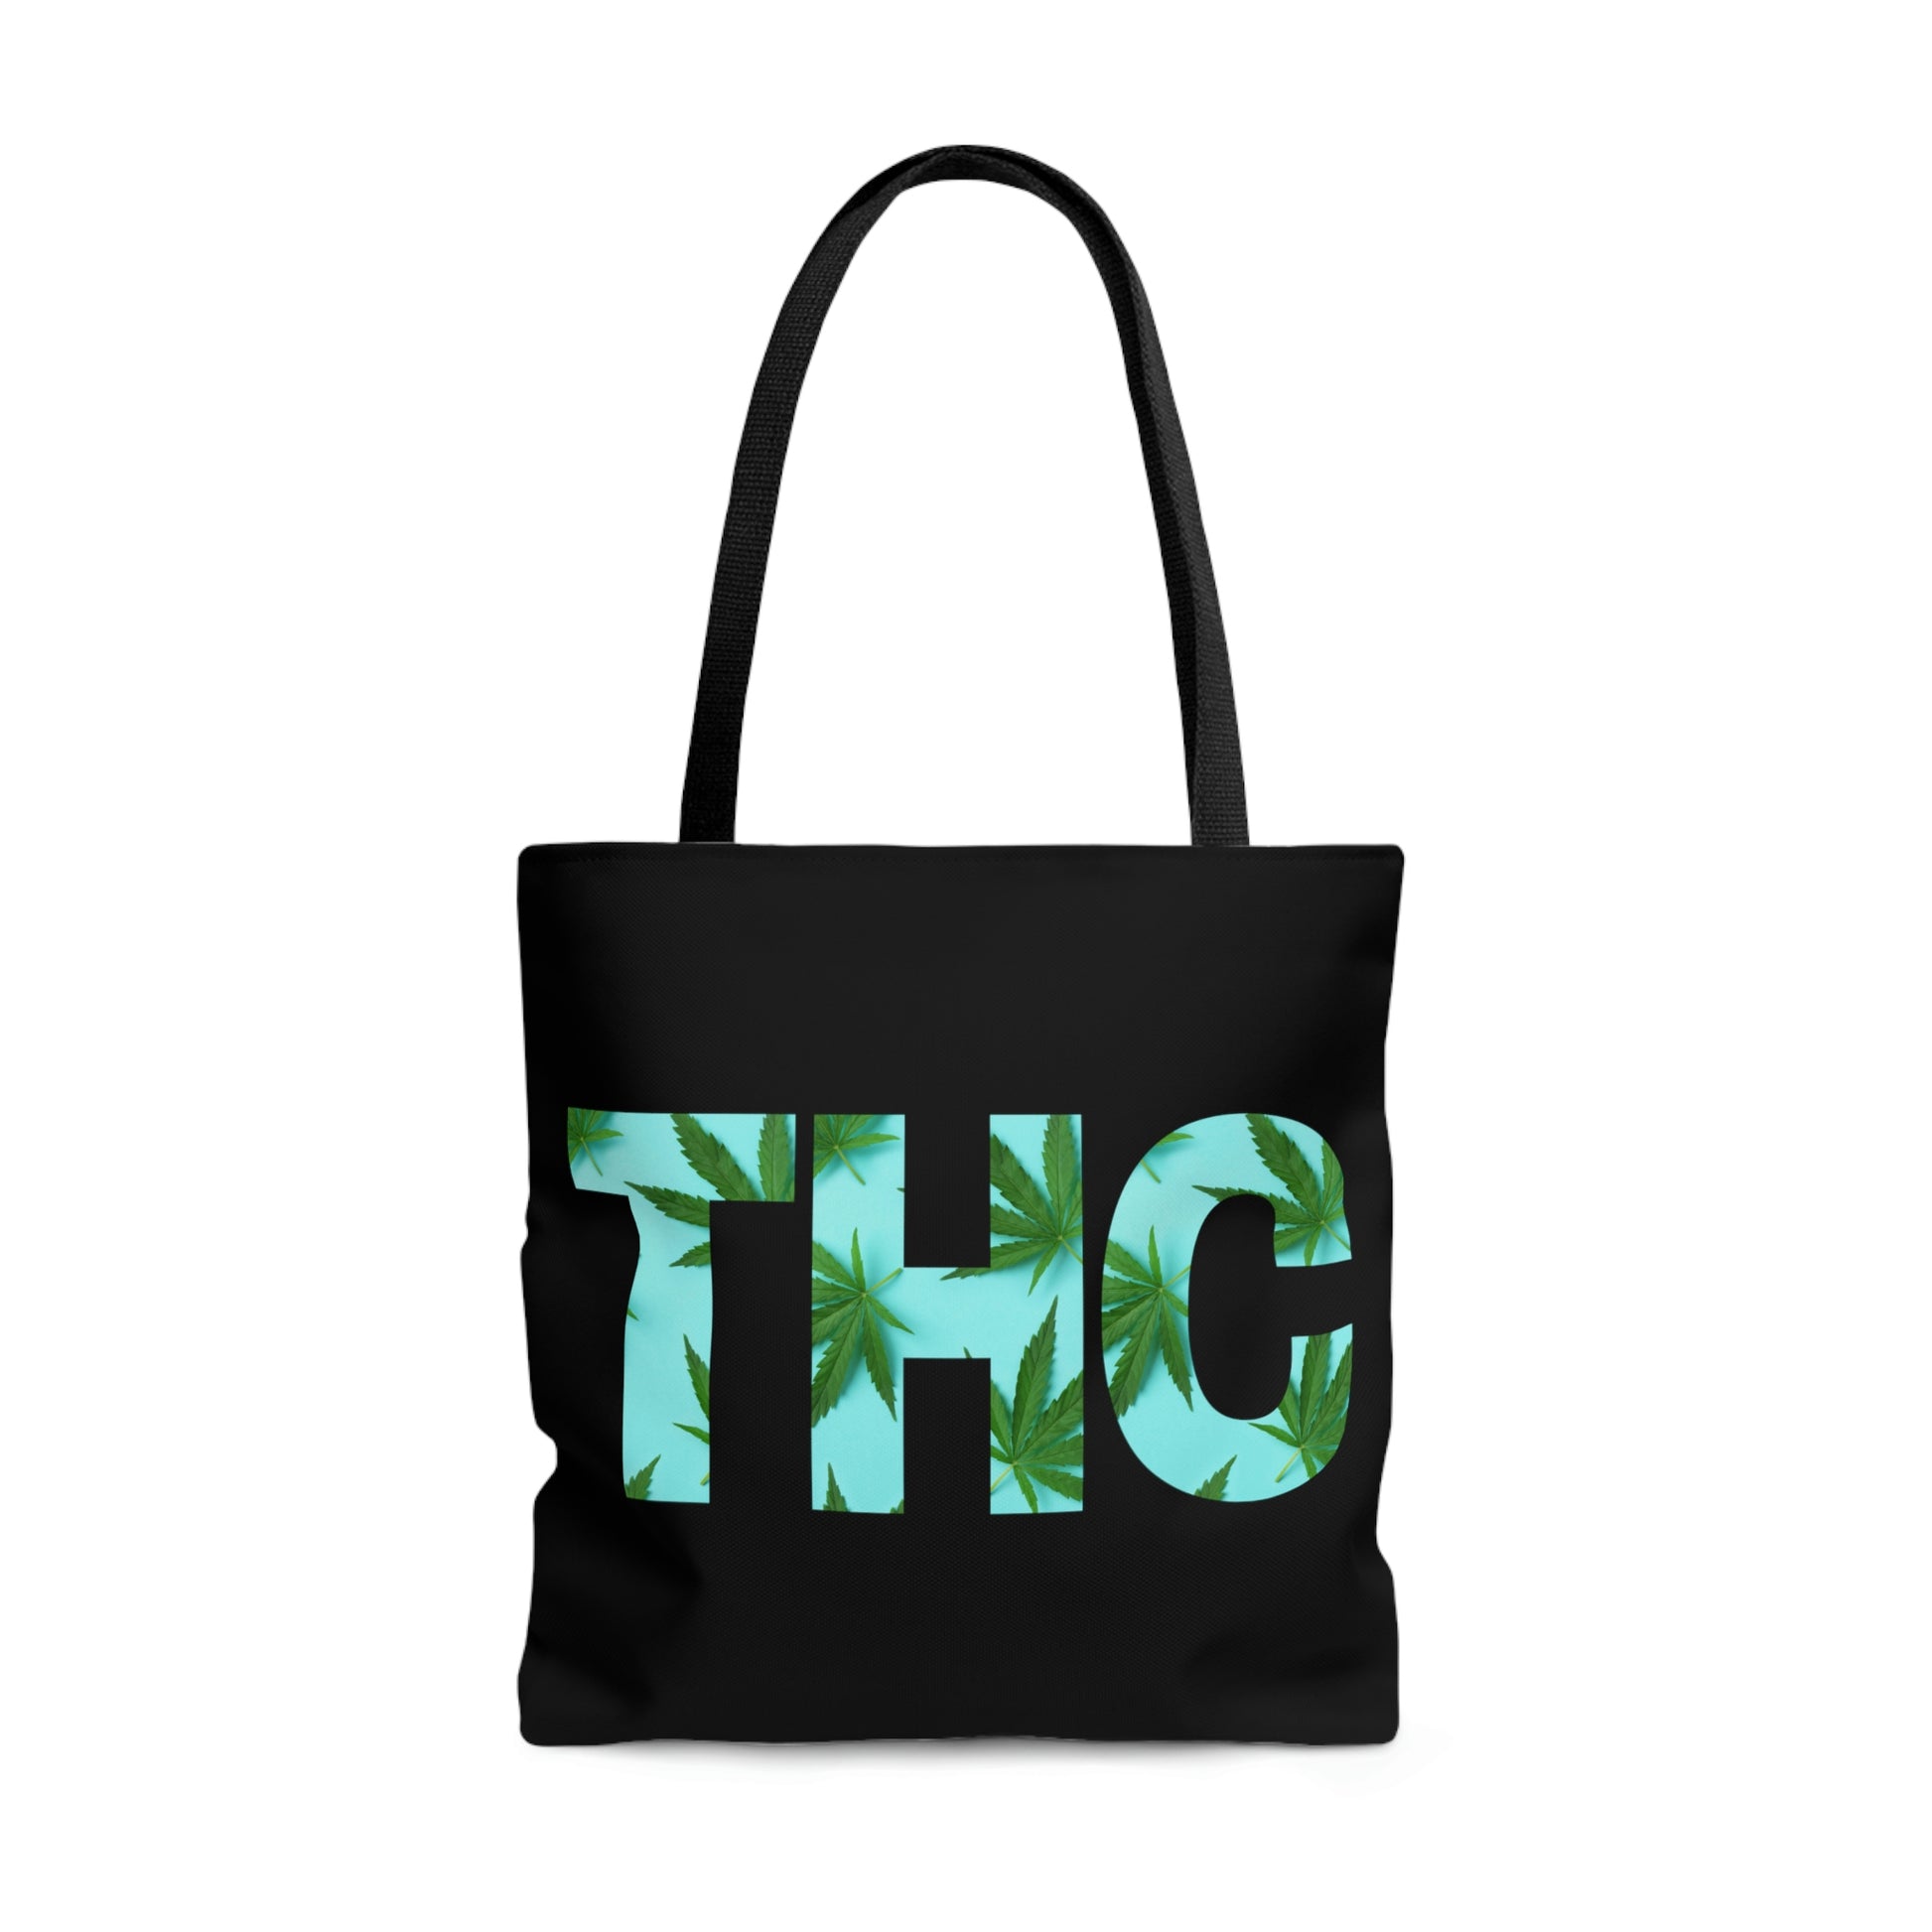 THC Black Weed-Themed Tote Bag has huge THC graphic design on front with cannabis leaves infused inside the lettering.